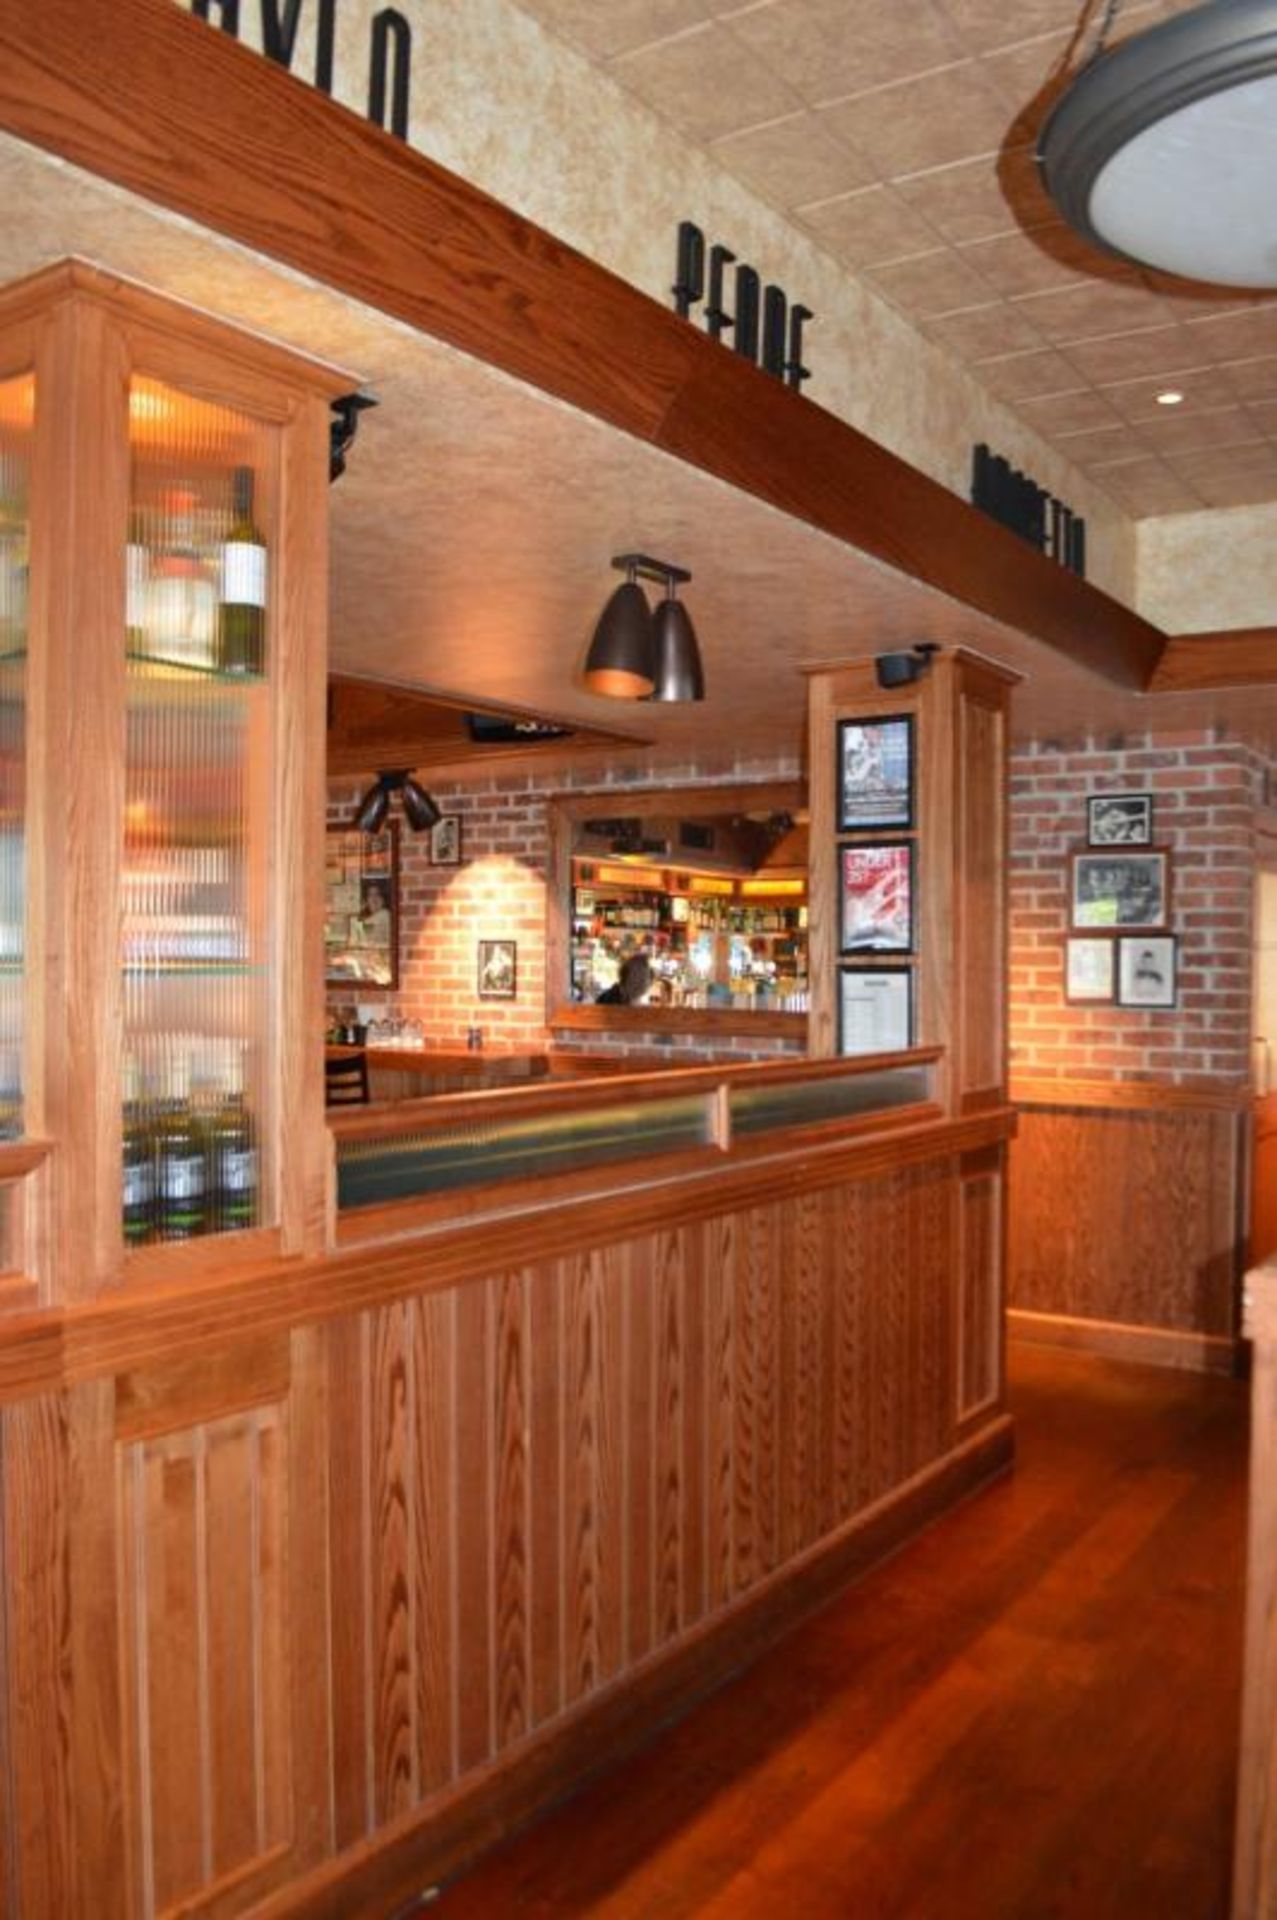 1 x Bar Restaurant Room Partition With Seating Bench, Pillar, Wine Cabinet and Foot Rest - Overall S - Image 13 of 21